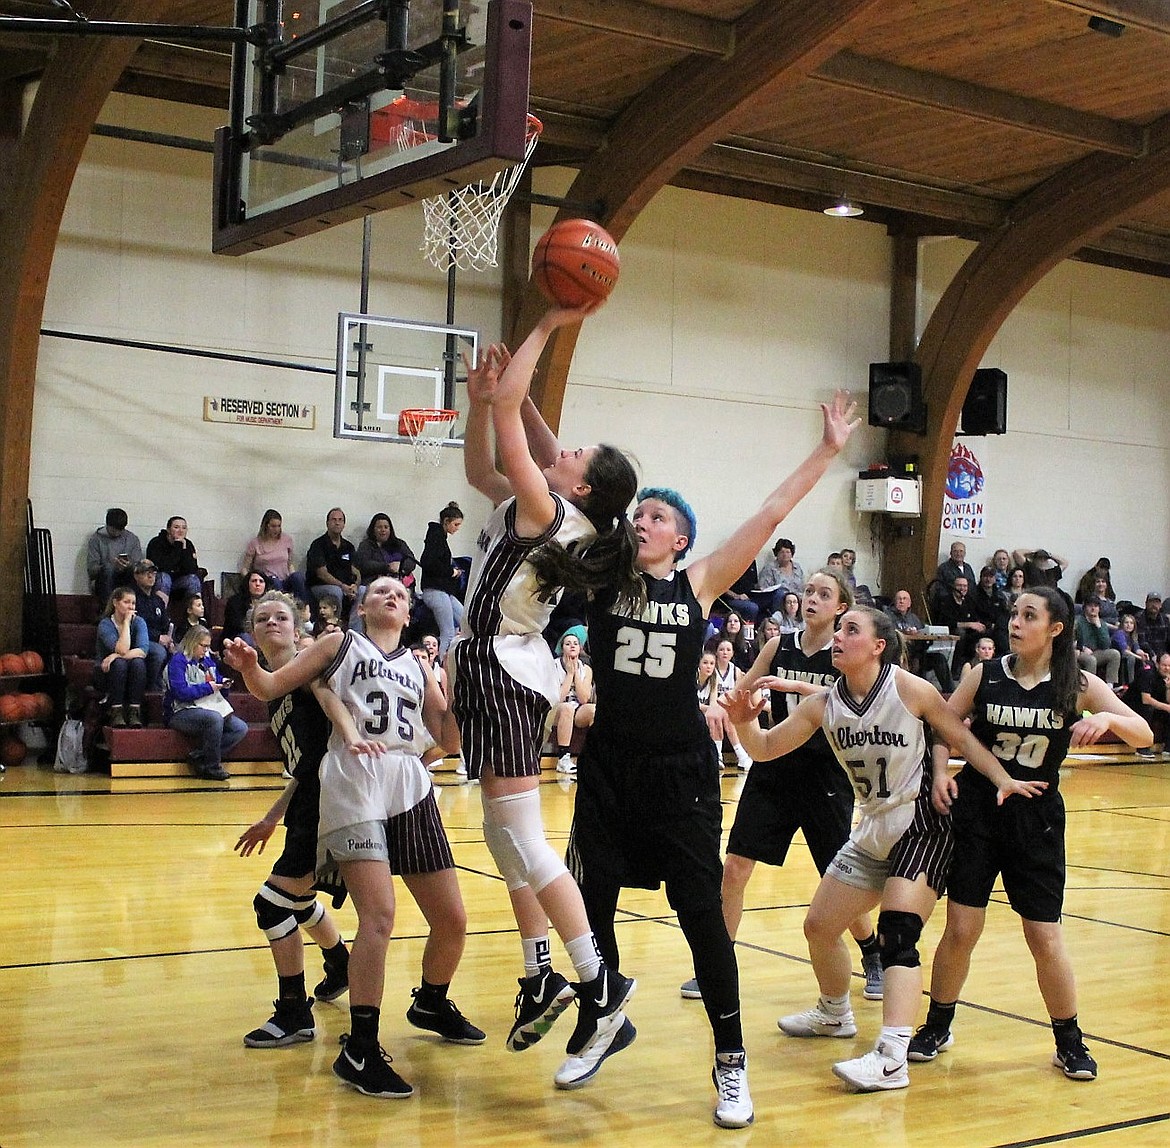 Sorren Reese jumps for a basket during the Clark Fork Mountain Cats game against Seeley-Swan on Jan. 25 in Alberton. The Lady Cats lost, 55-32. (Kathleen Woodford/Mineral Independent)